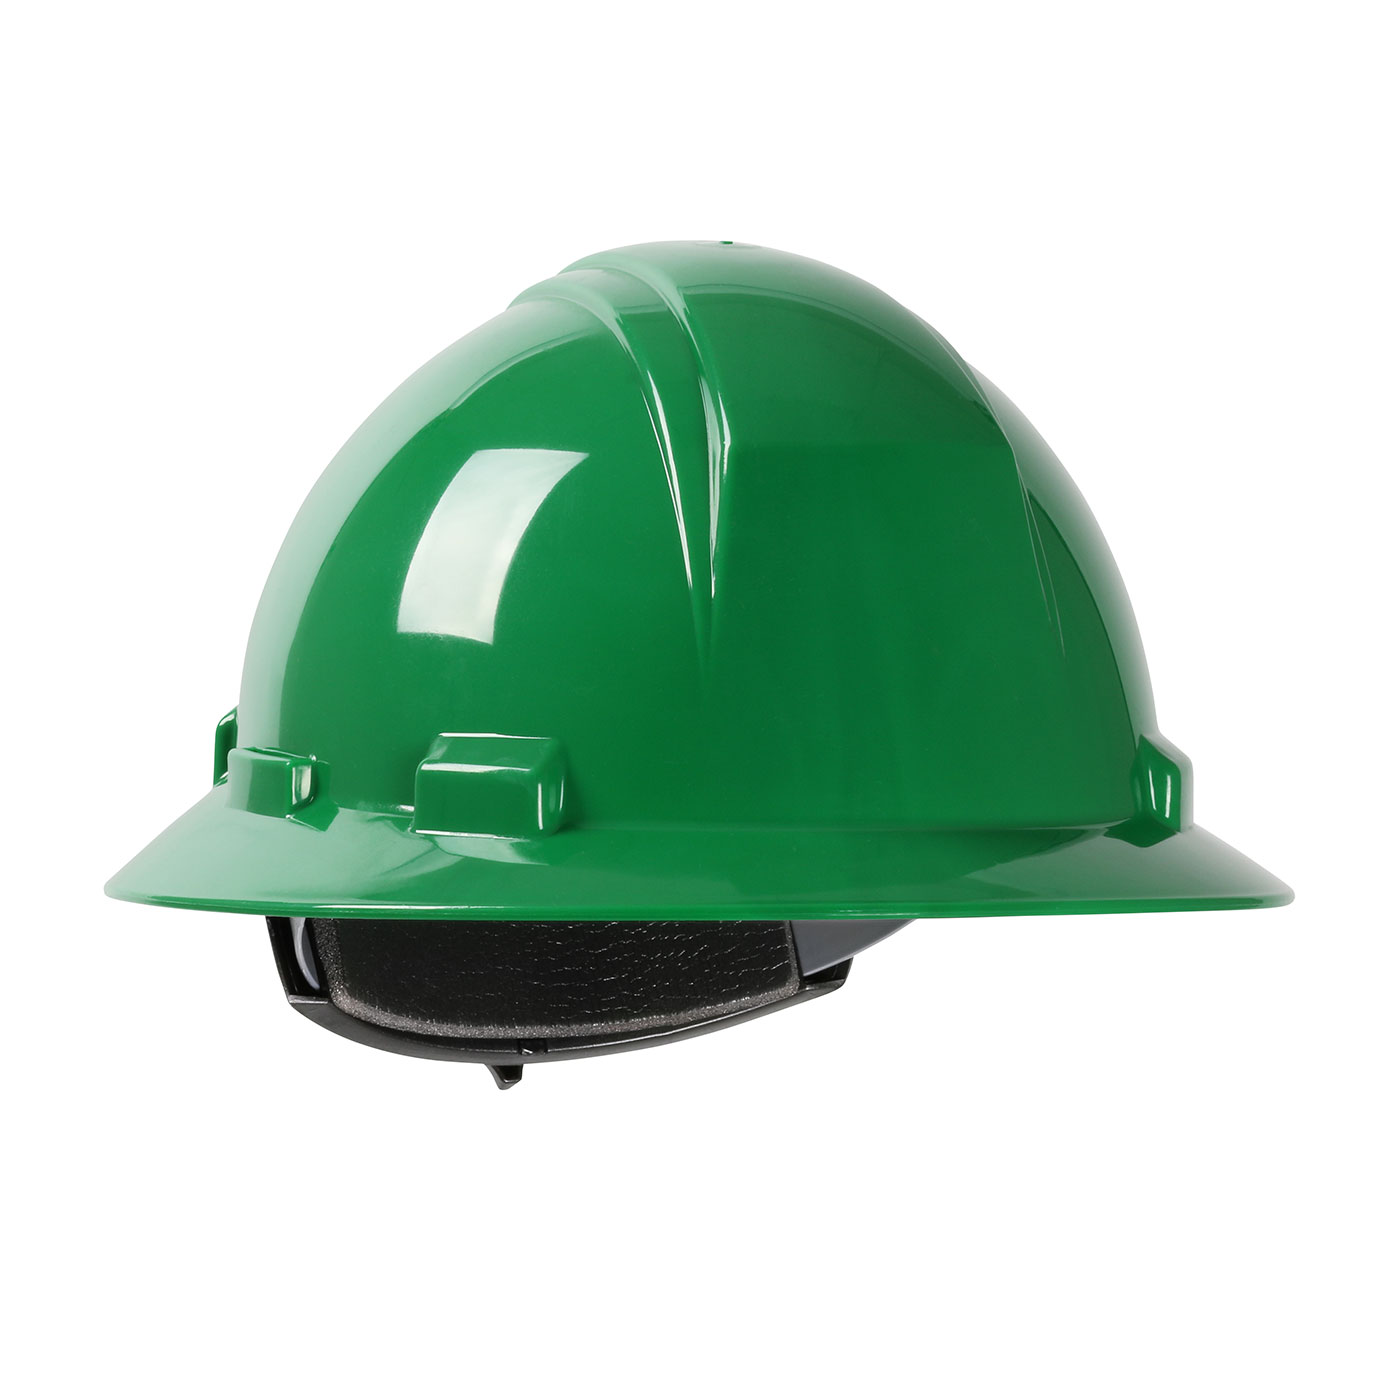 PIP® Dynamic Kilimanjaro™ 280-HP641R-04 Full Brim Hard Hat with HDPE Shell, 4 Point Textile Suspension and Wheel Ratchet Adjustment, Green